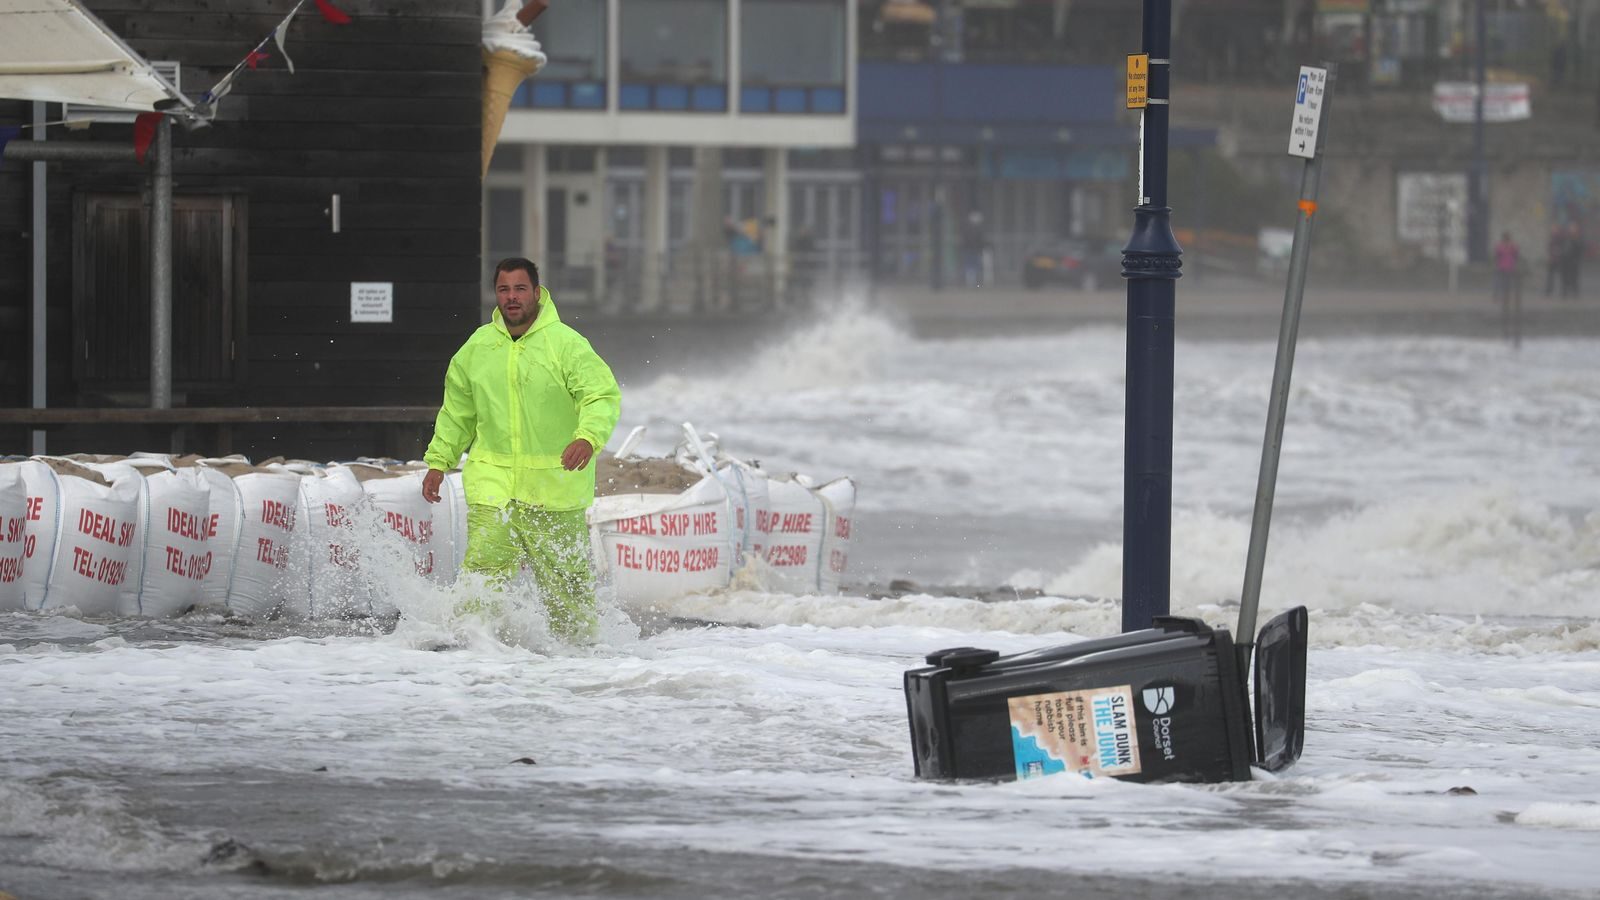 Water covered the streets in Swanage, Dorset amid Storm Alex